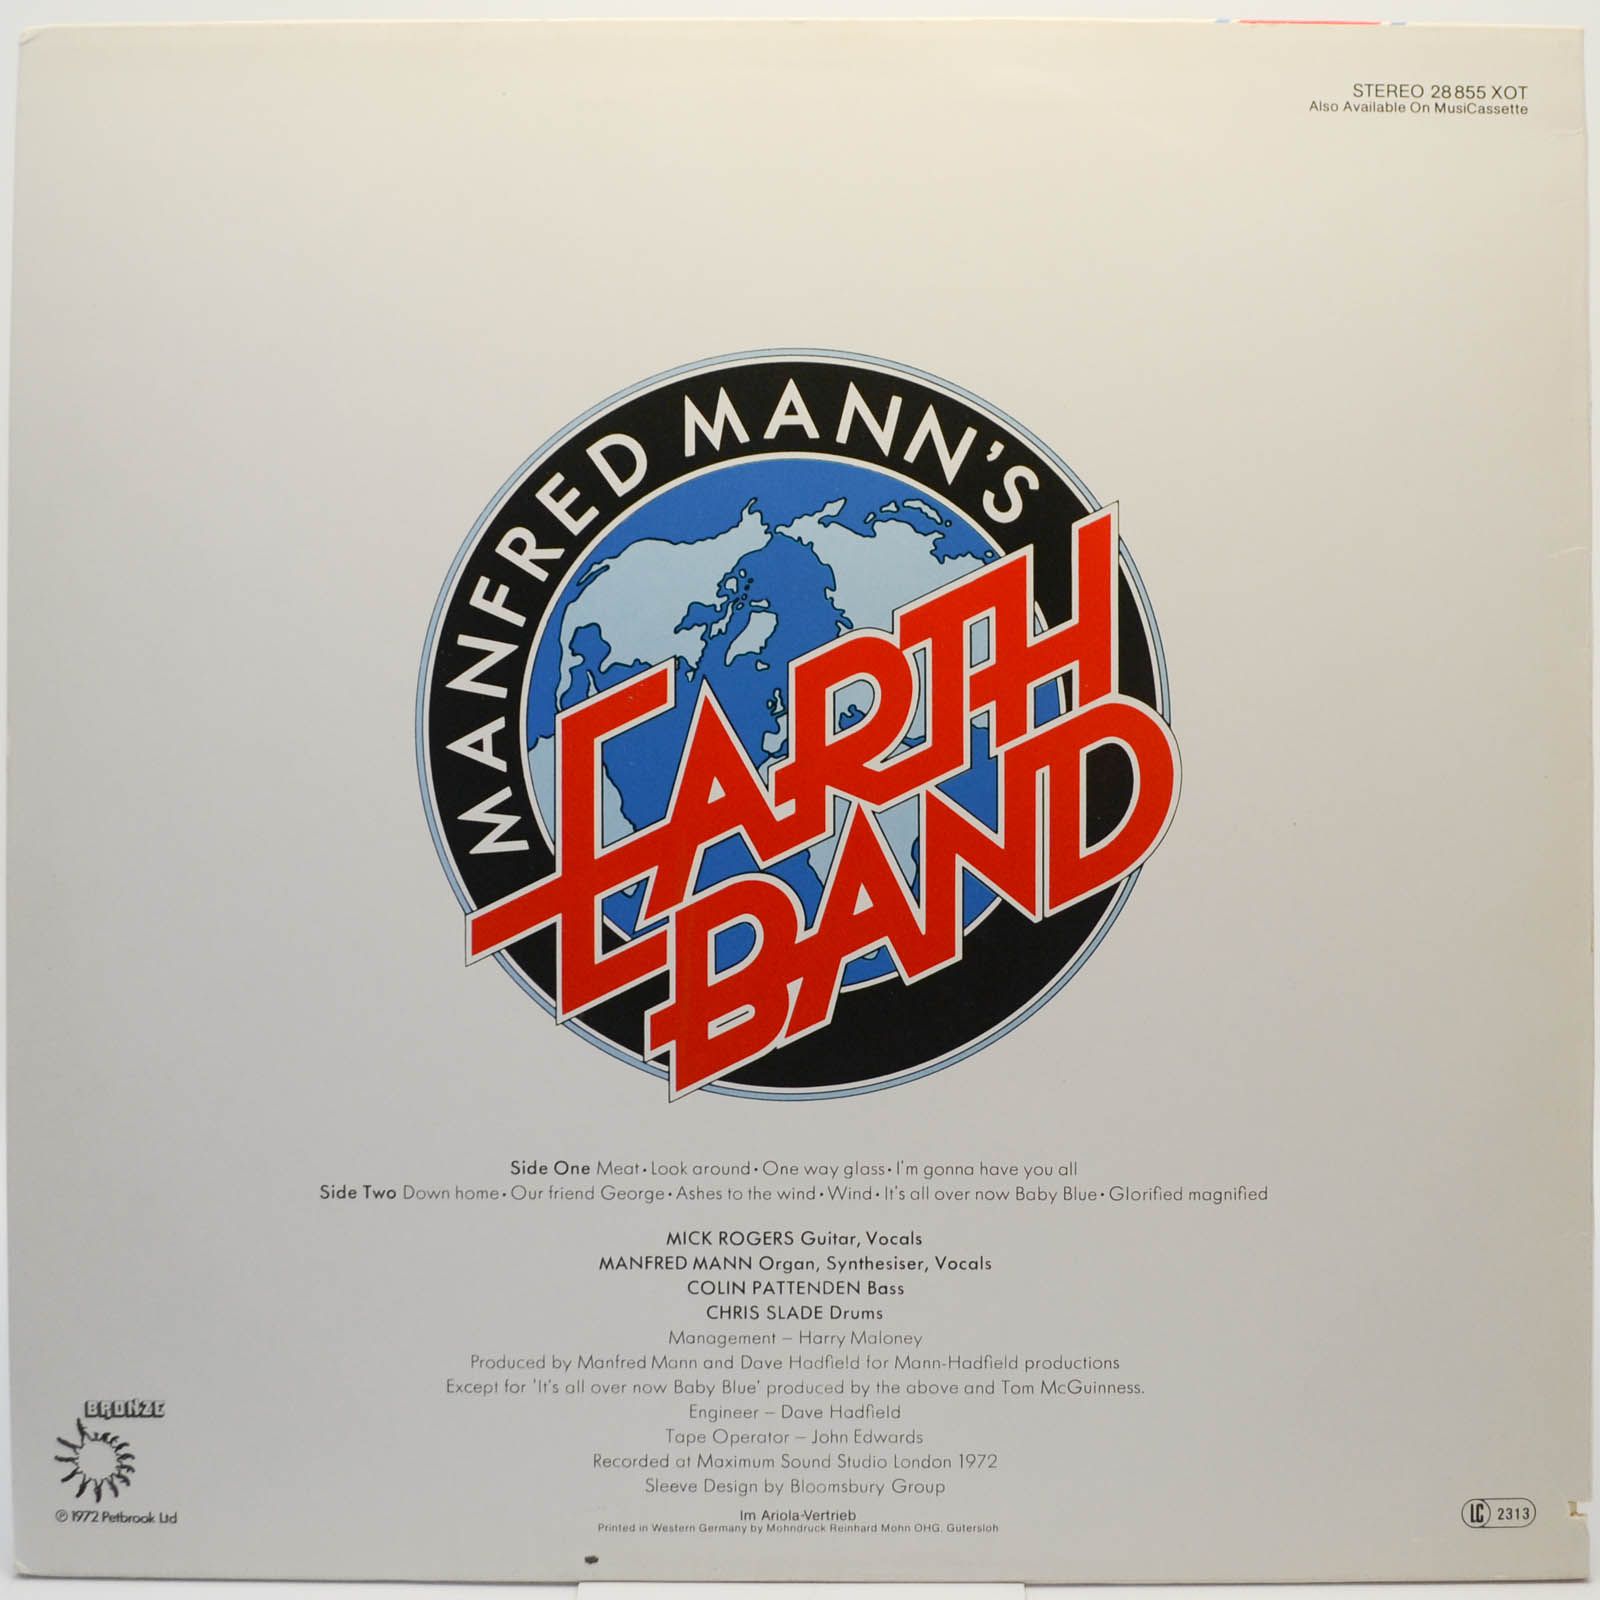 Manfred Mann's Earth Band — Glorified Magnified, 1972